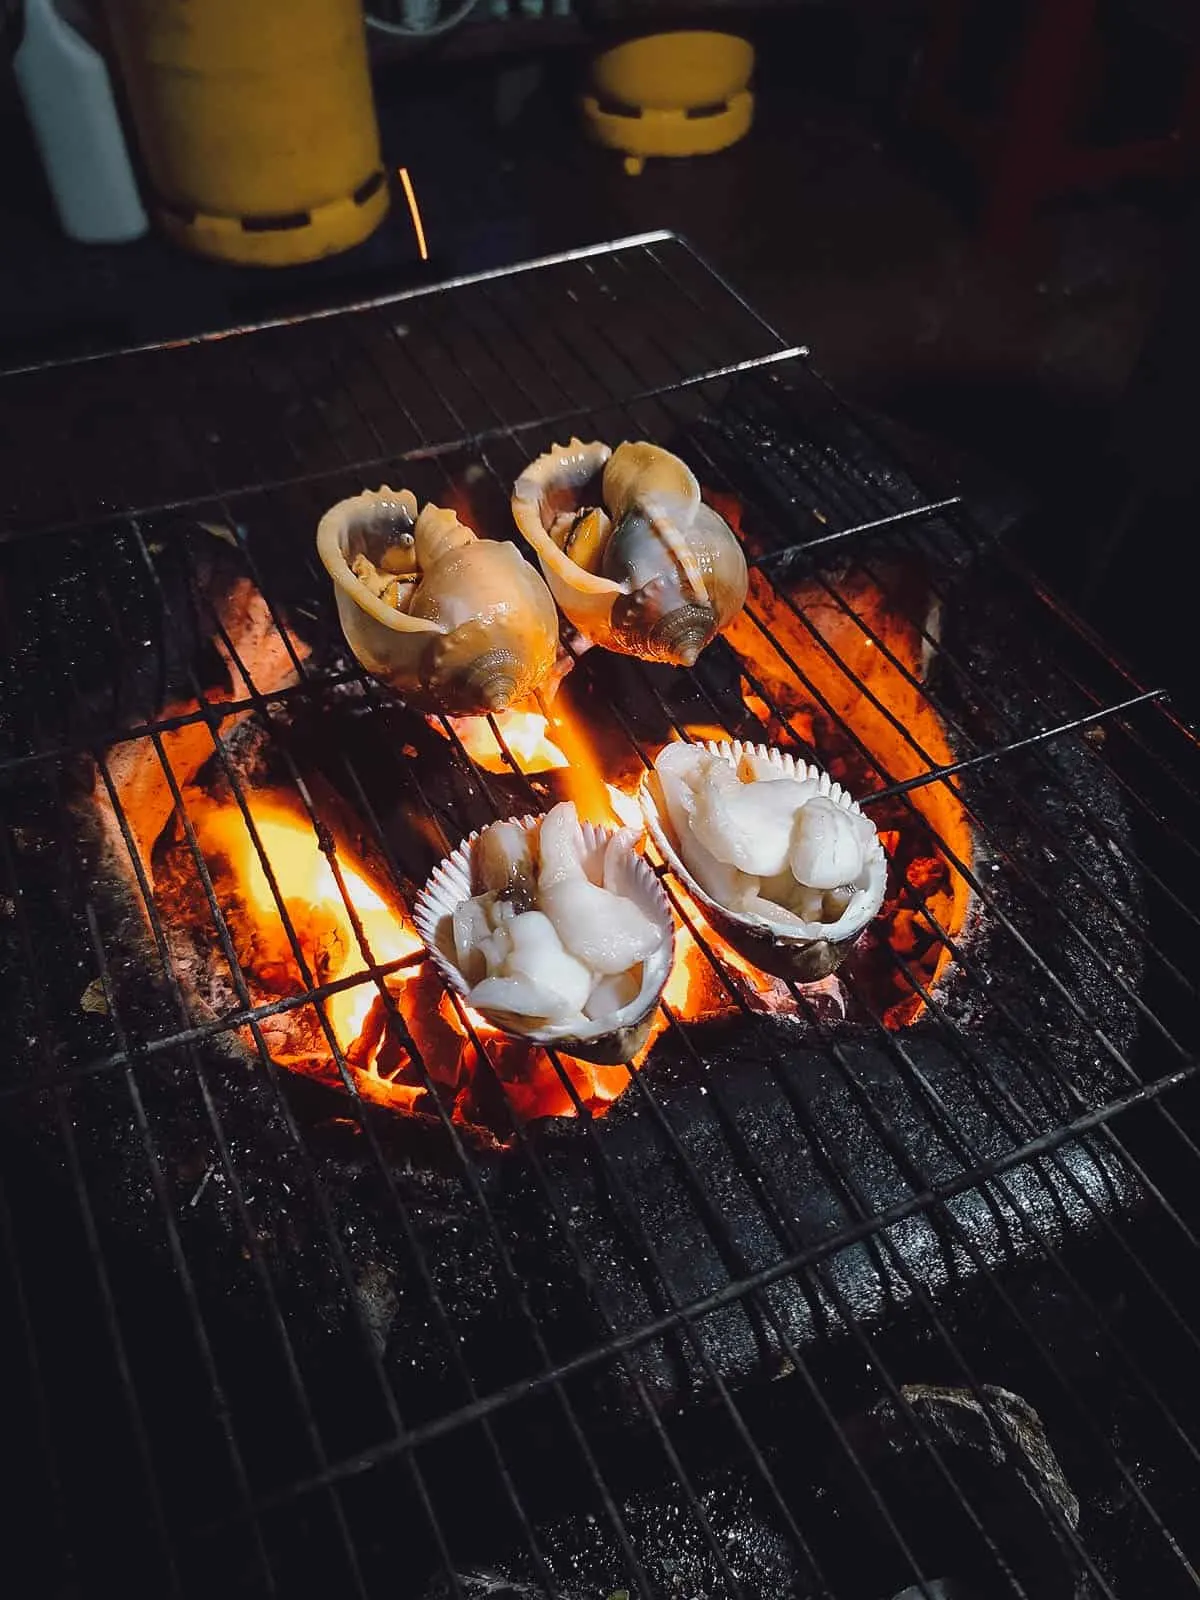 Grilling snails at Oc Loan in Saigon